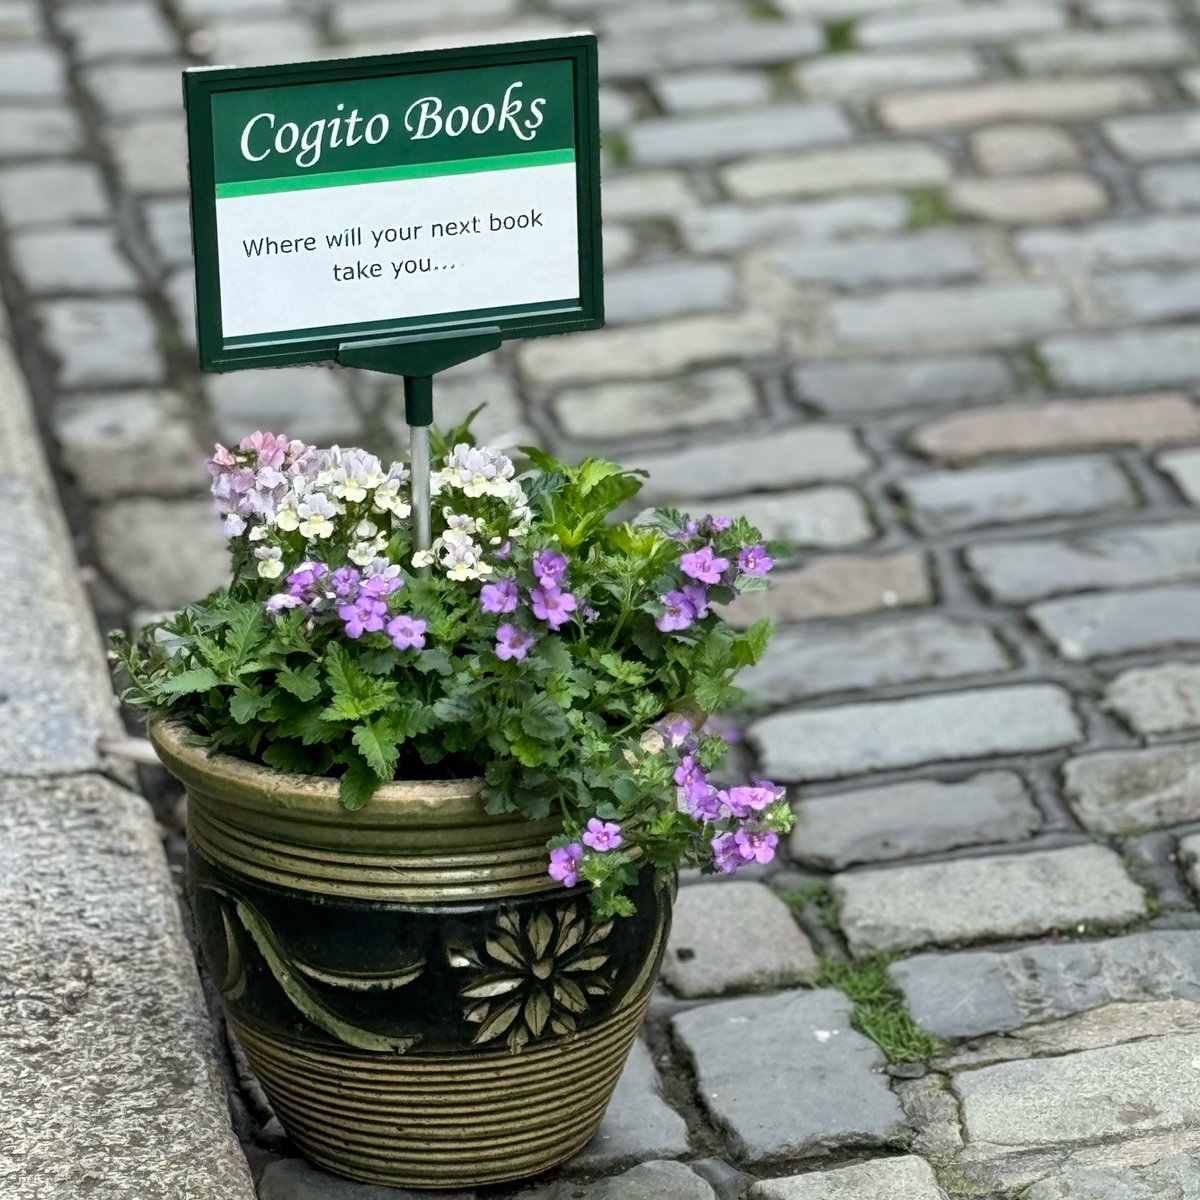 Spring has finally sprung on the cobbles! Do pop in and see us if you're out enjoying the long awaited balmy air today. #spring #sunshine #holidayreading #newbooks #choosebookshops #shopsmall #shopindependent #lovelocal